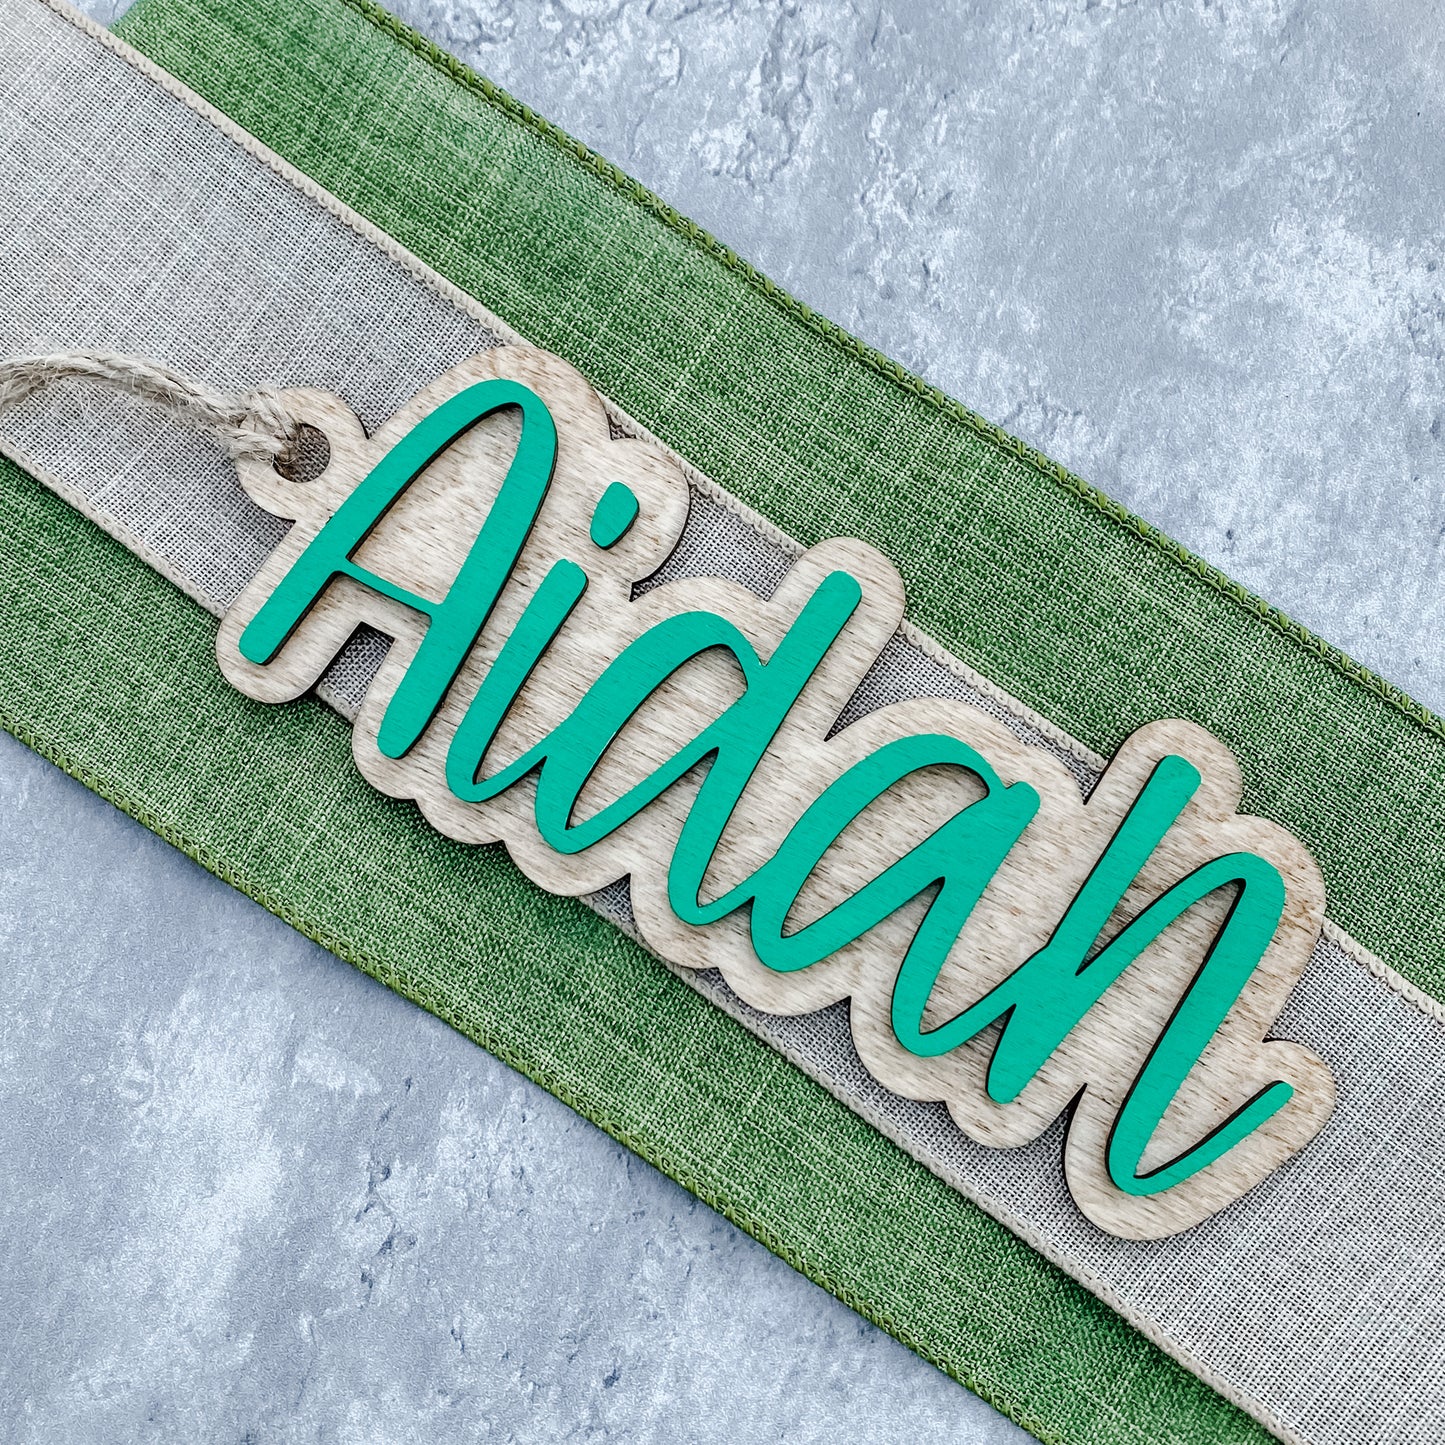 Wooden 3-D Stocking Tags or Ornaments